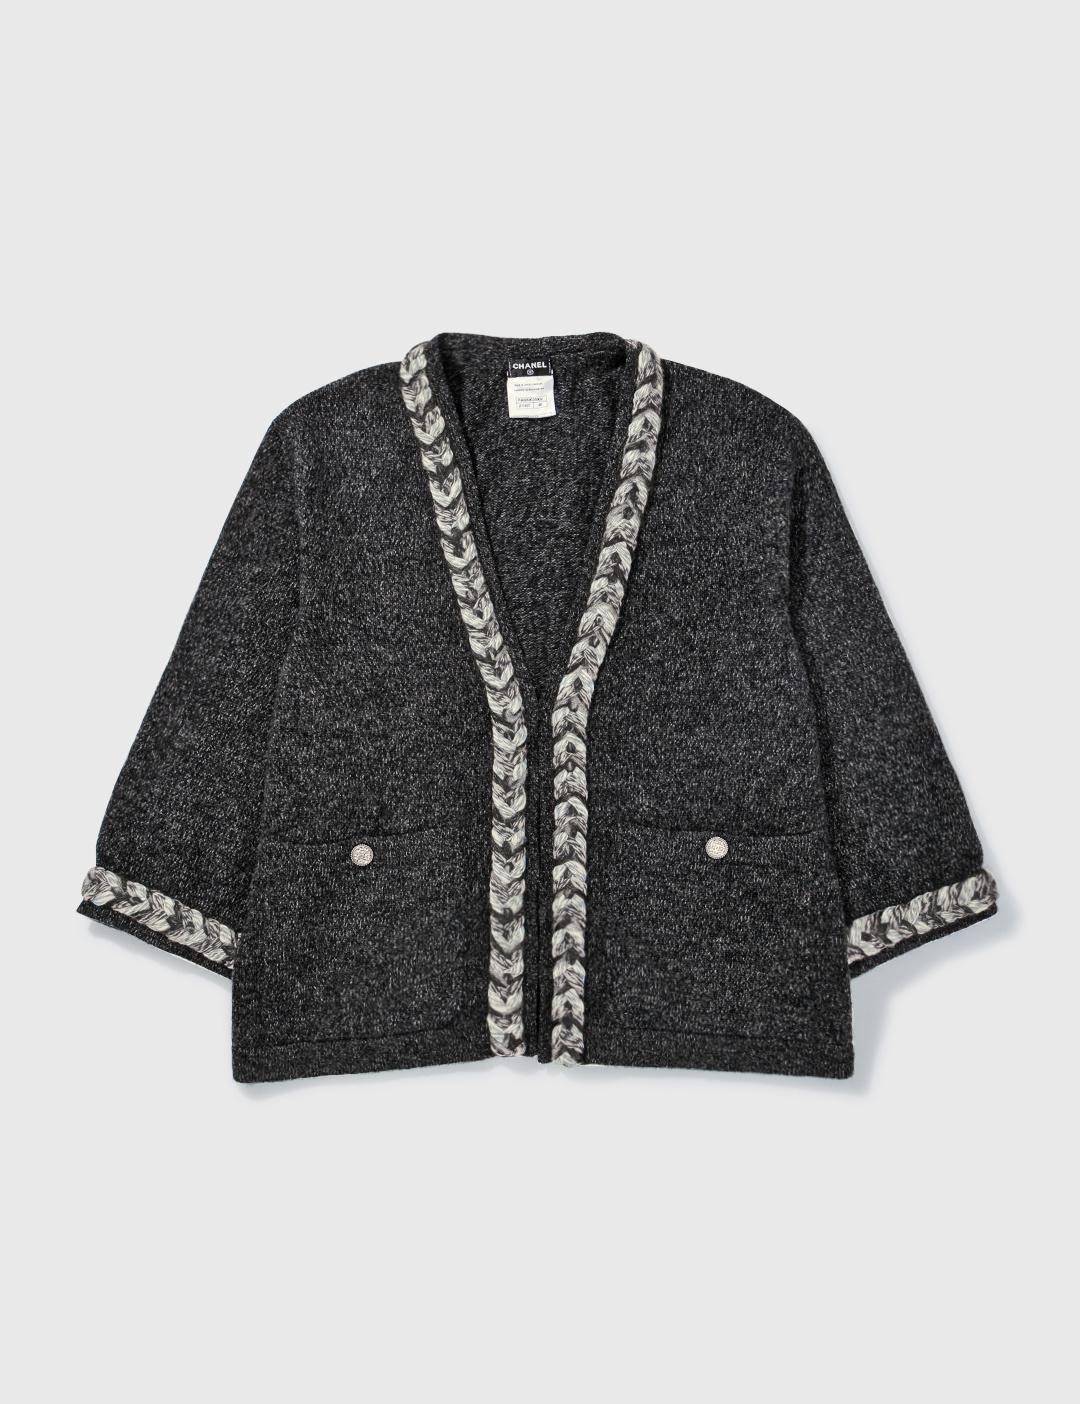 CHANEL CASHMERE CARDIGAN by CHANEL